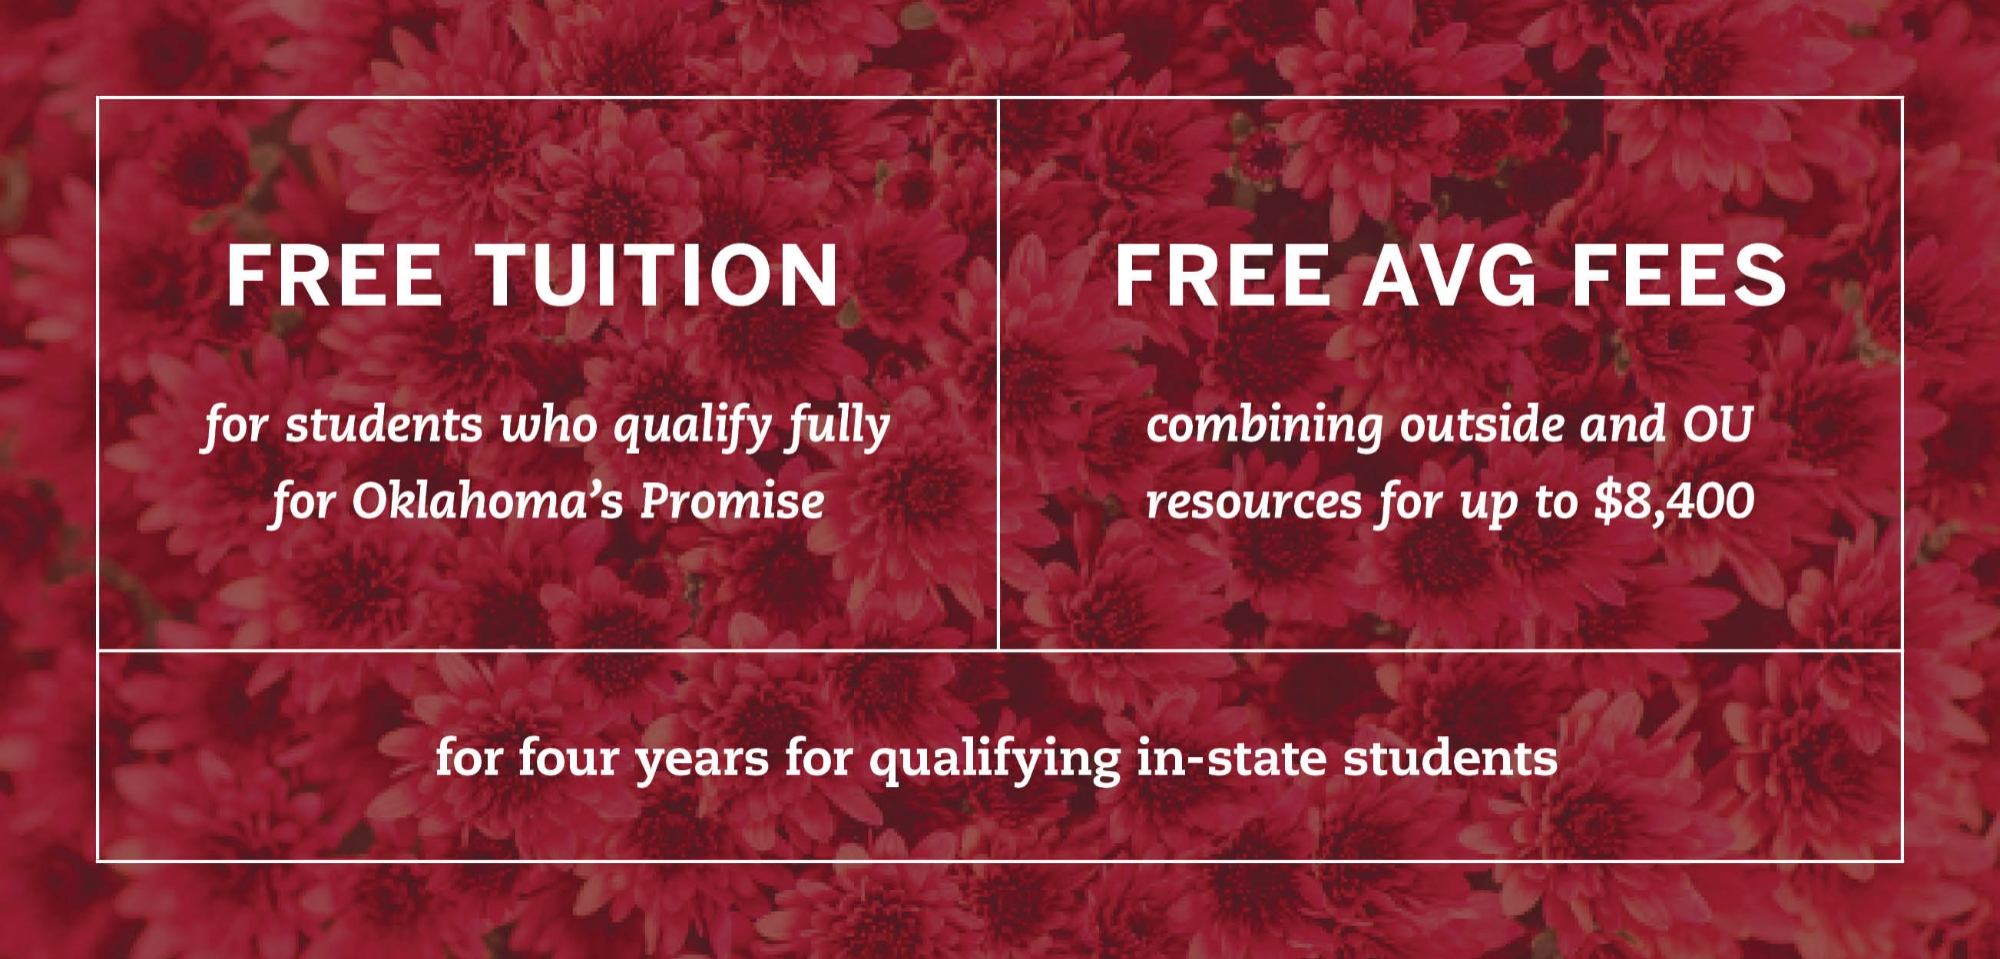 Crimson Commitment: Free tuition for students who qualify fully for Oklahoma's Promise, and free average feed combining outside and OU resources for up to $8,000 for four years for qualifying in-state students